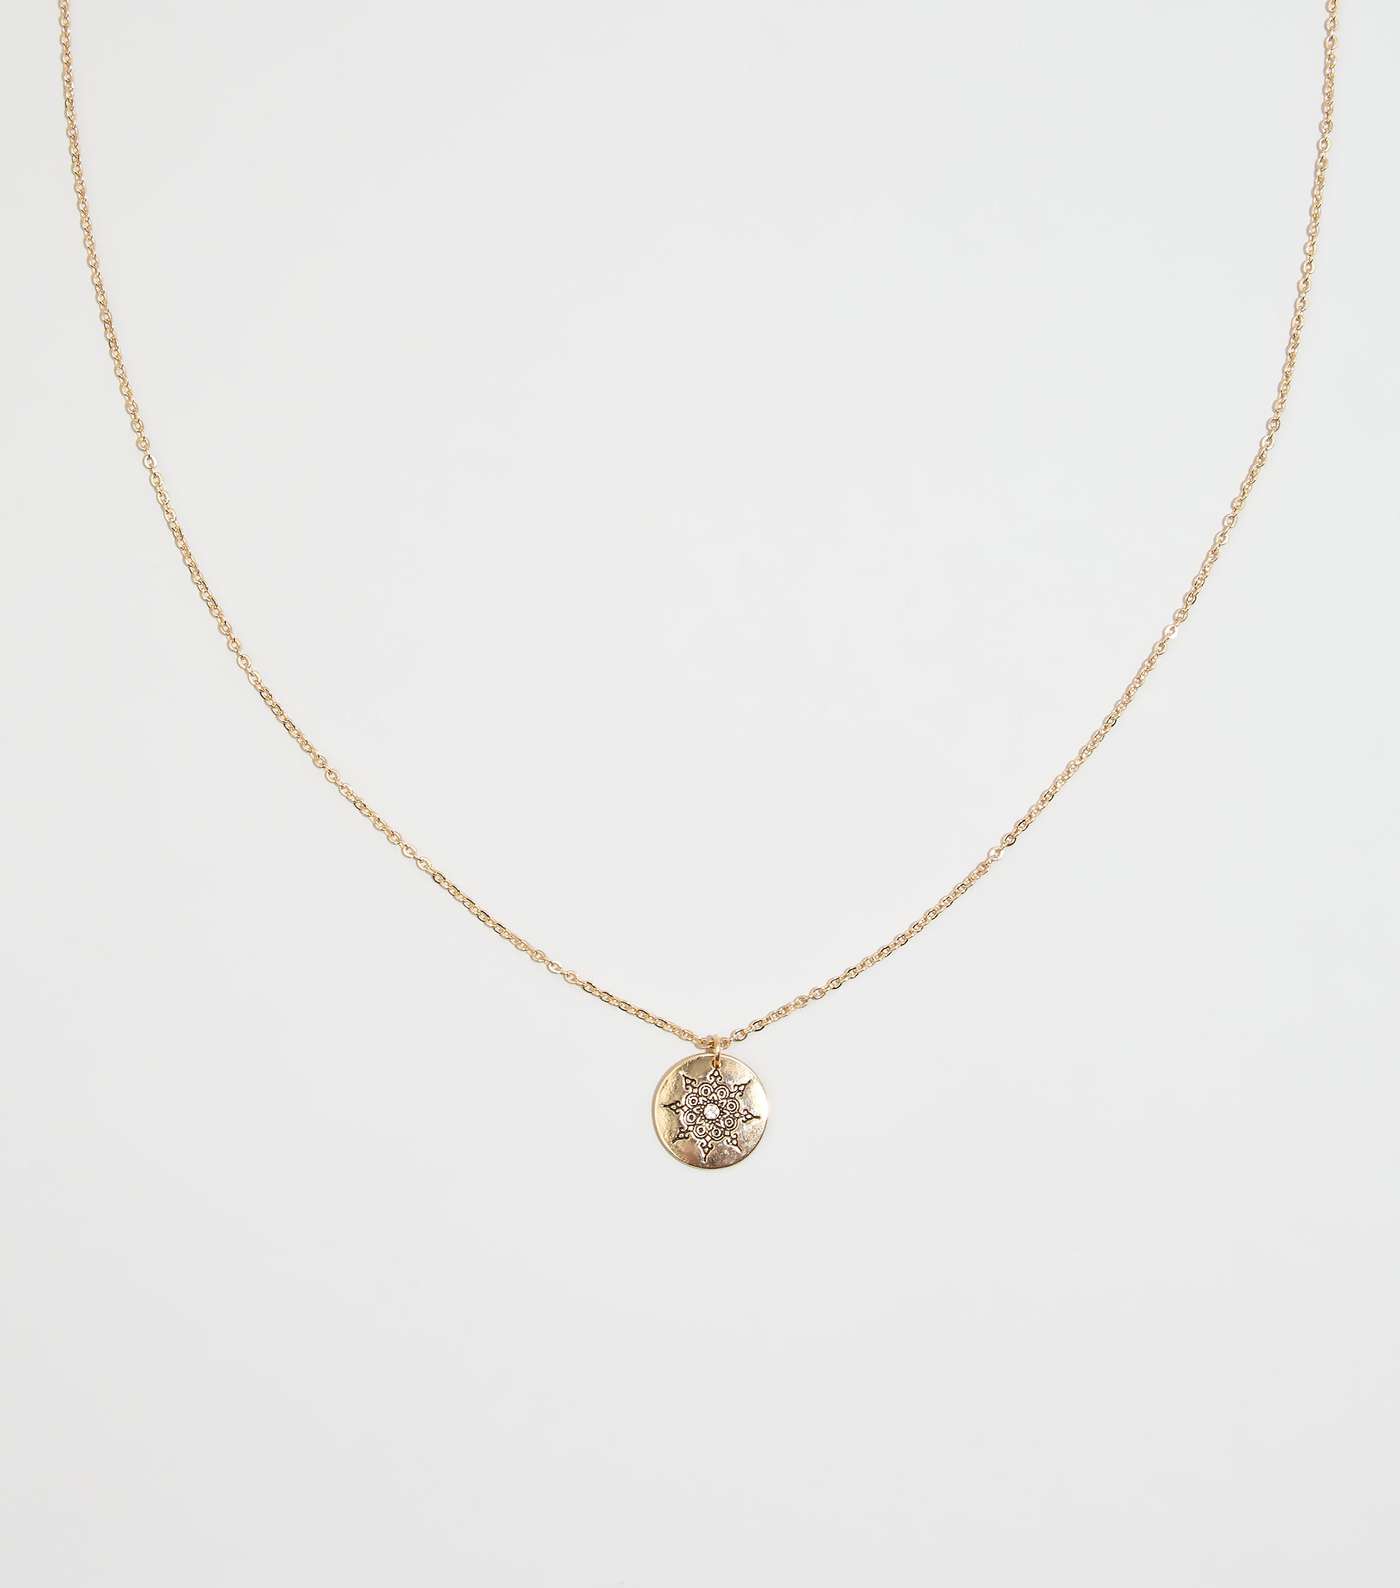 Gold Hand Pendant Necklace